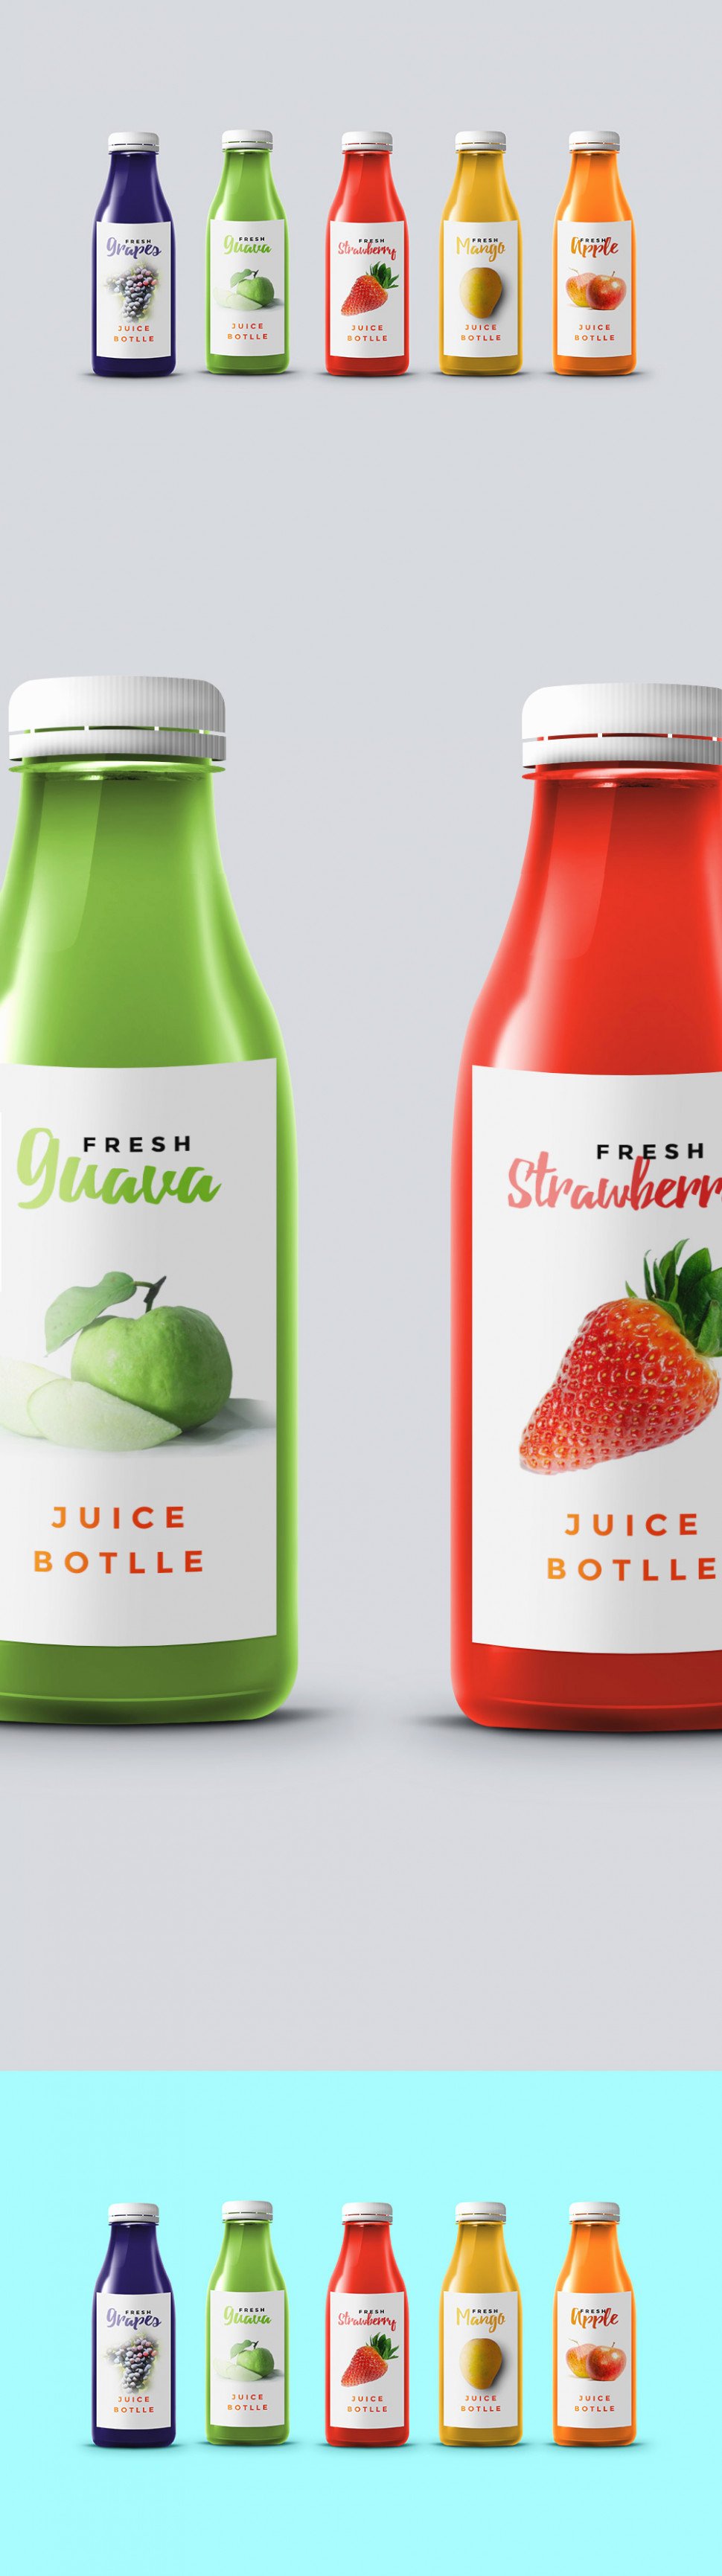 E Juice Label Template New What S so Trendy About E Juice